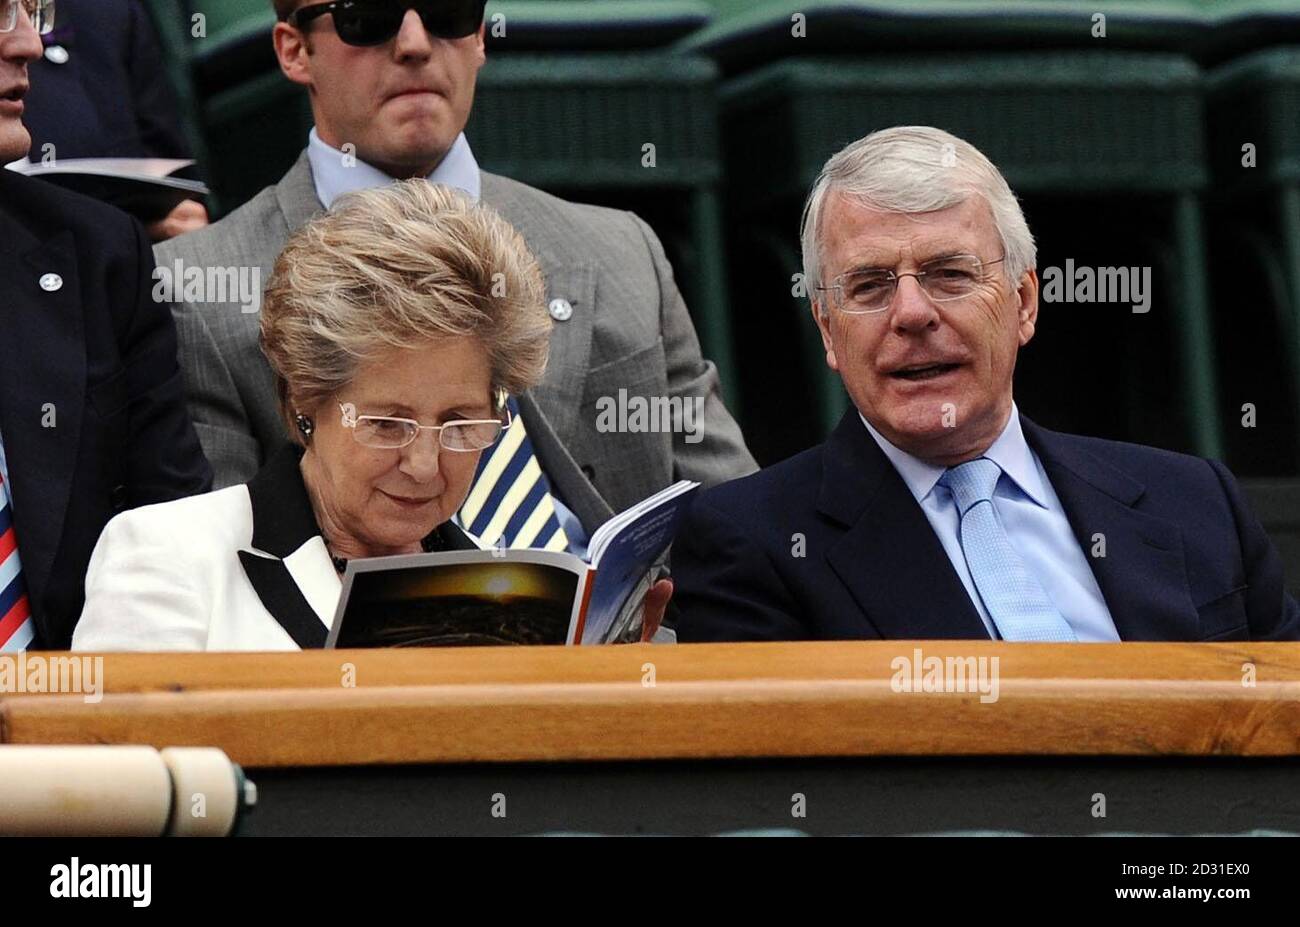 Sir John Major with his wife Nora in the Royal Box on Centre Court during day five of the 2012 Wimbledon Championships at the All England Lawn Tennis Club, Wimbledon. Stock Photo